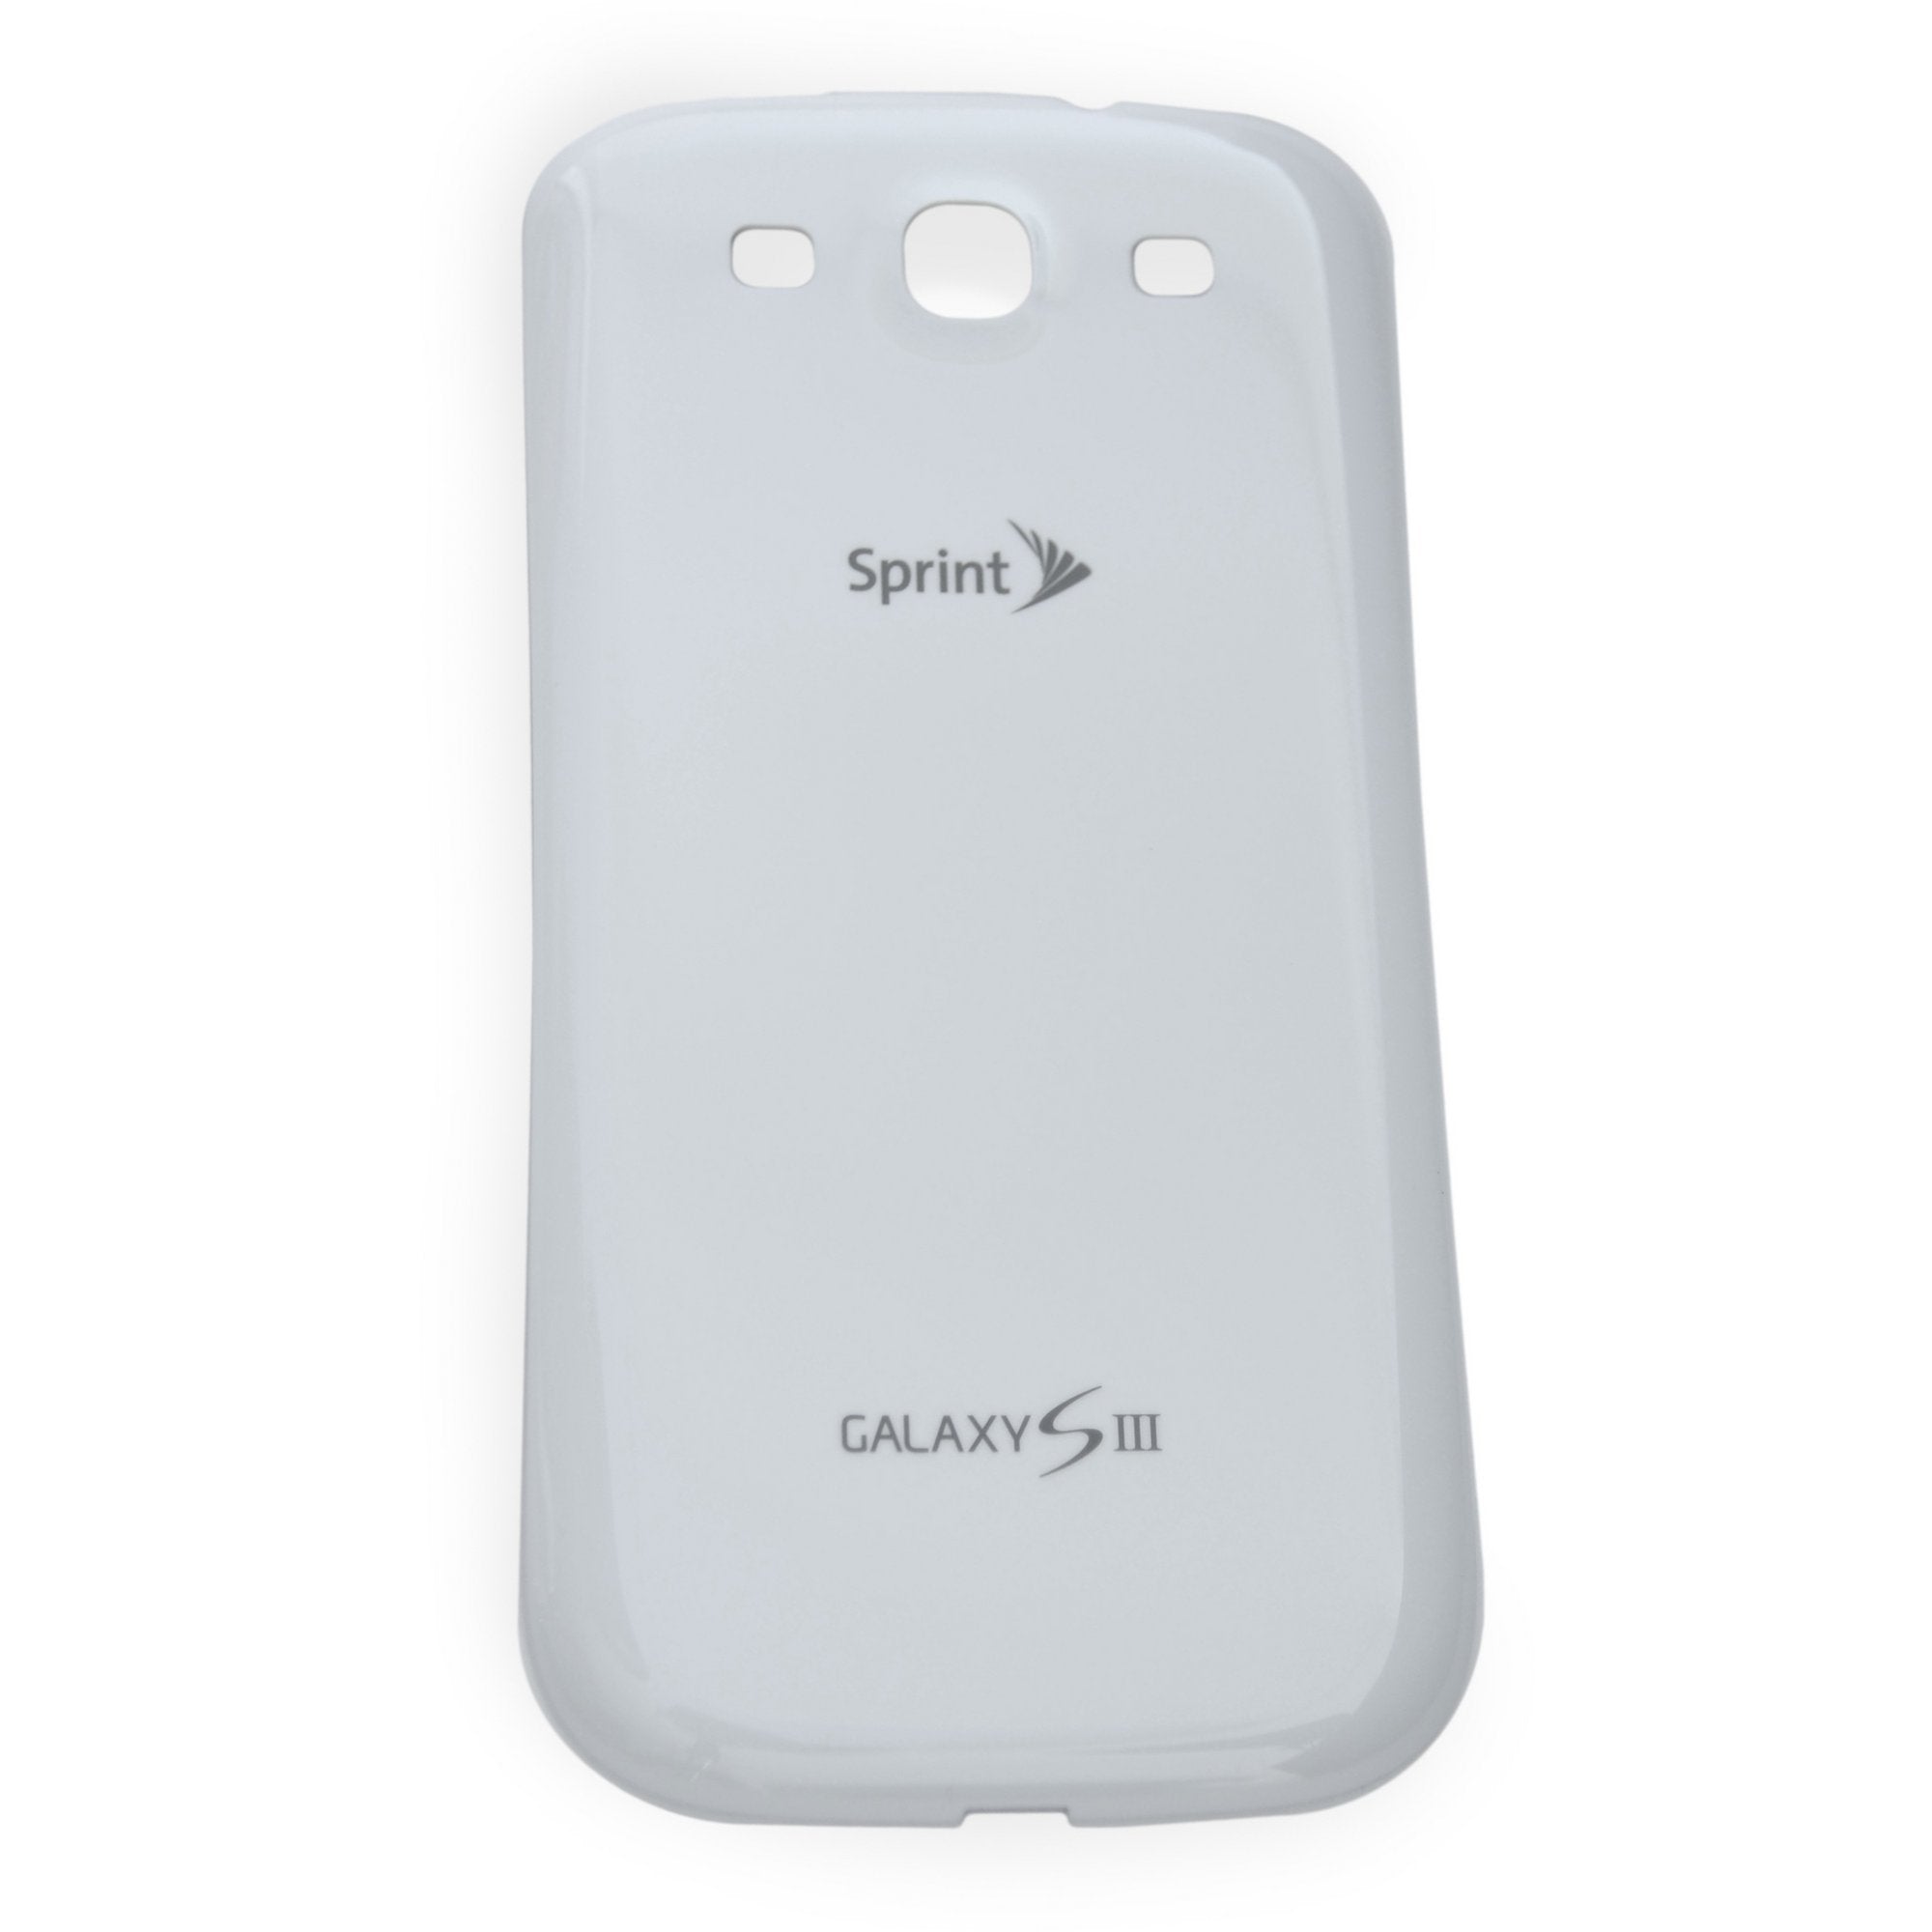 Galaxy S III Battery Cover (Sprint) White New